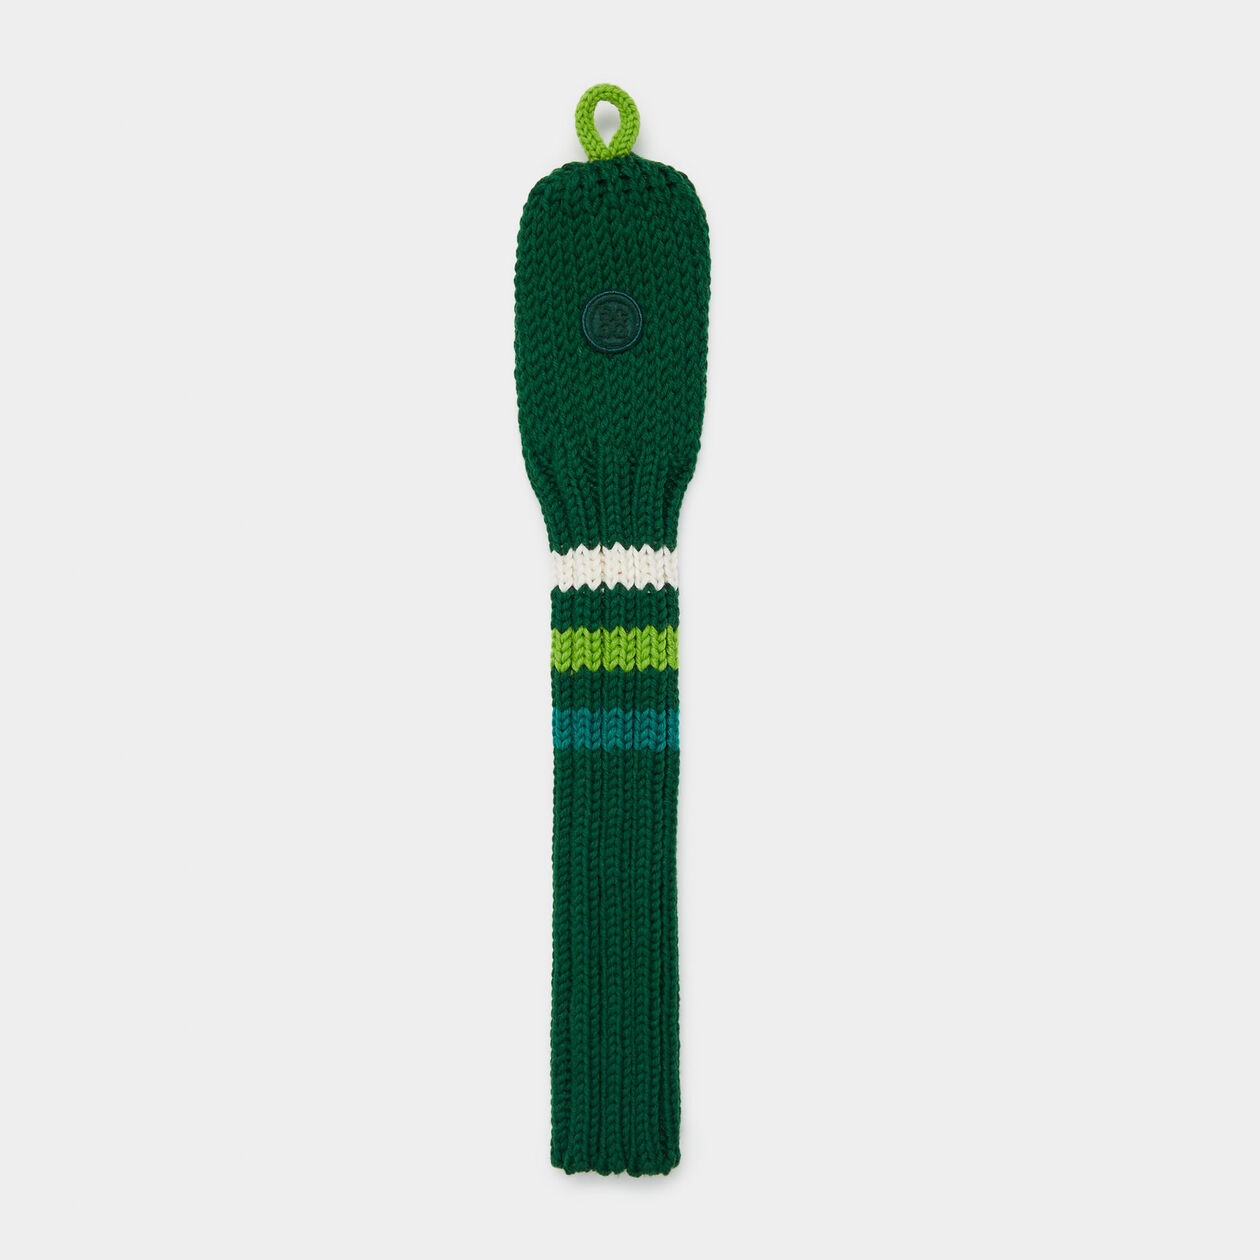 LIMITED EDITION KNIT FAIRWAY HEADCOVER | GOLF HEAD COVERS